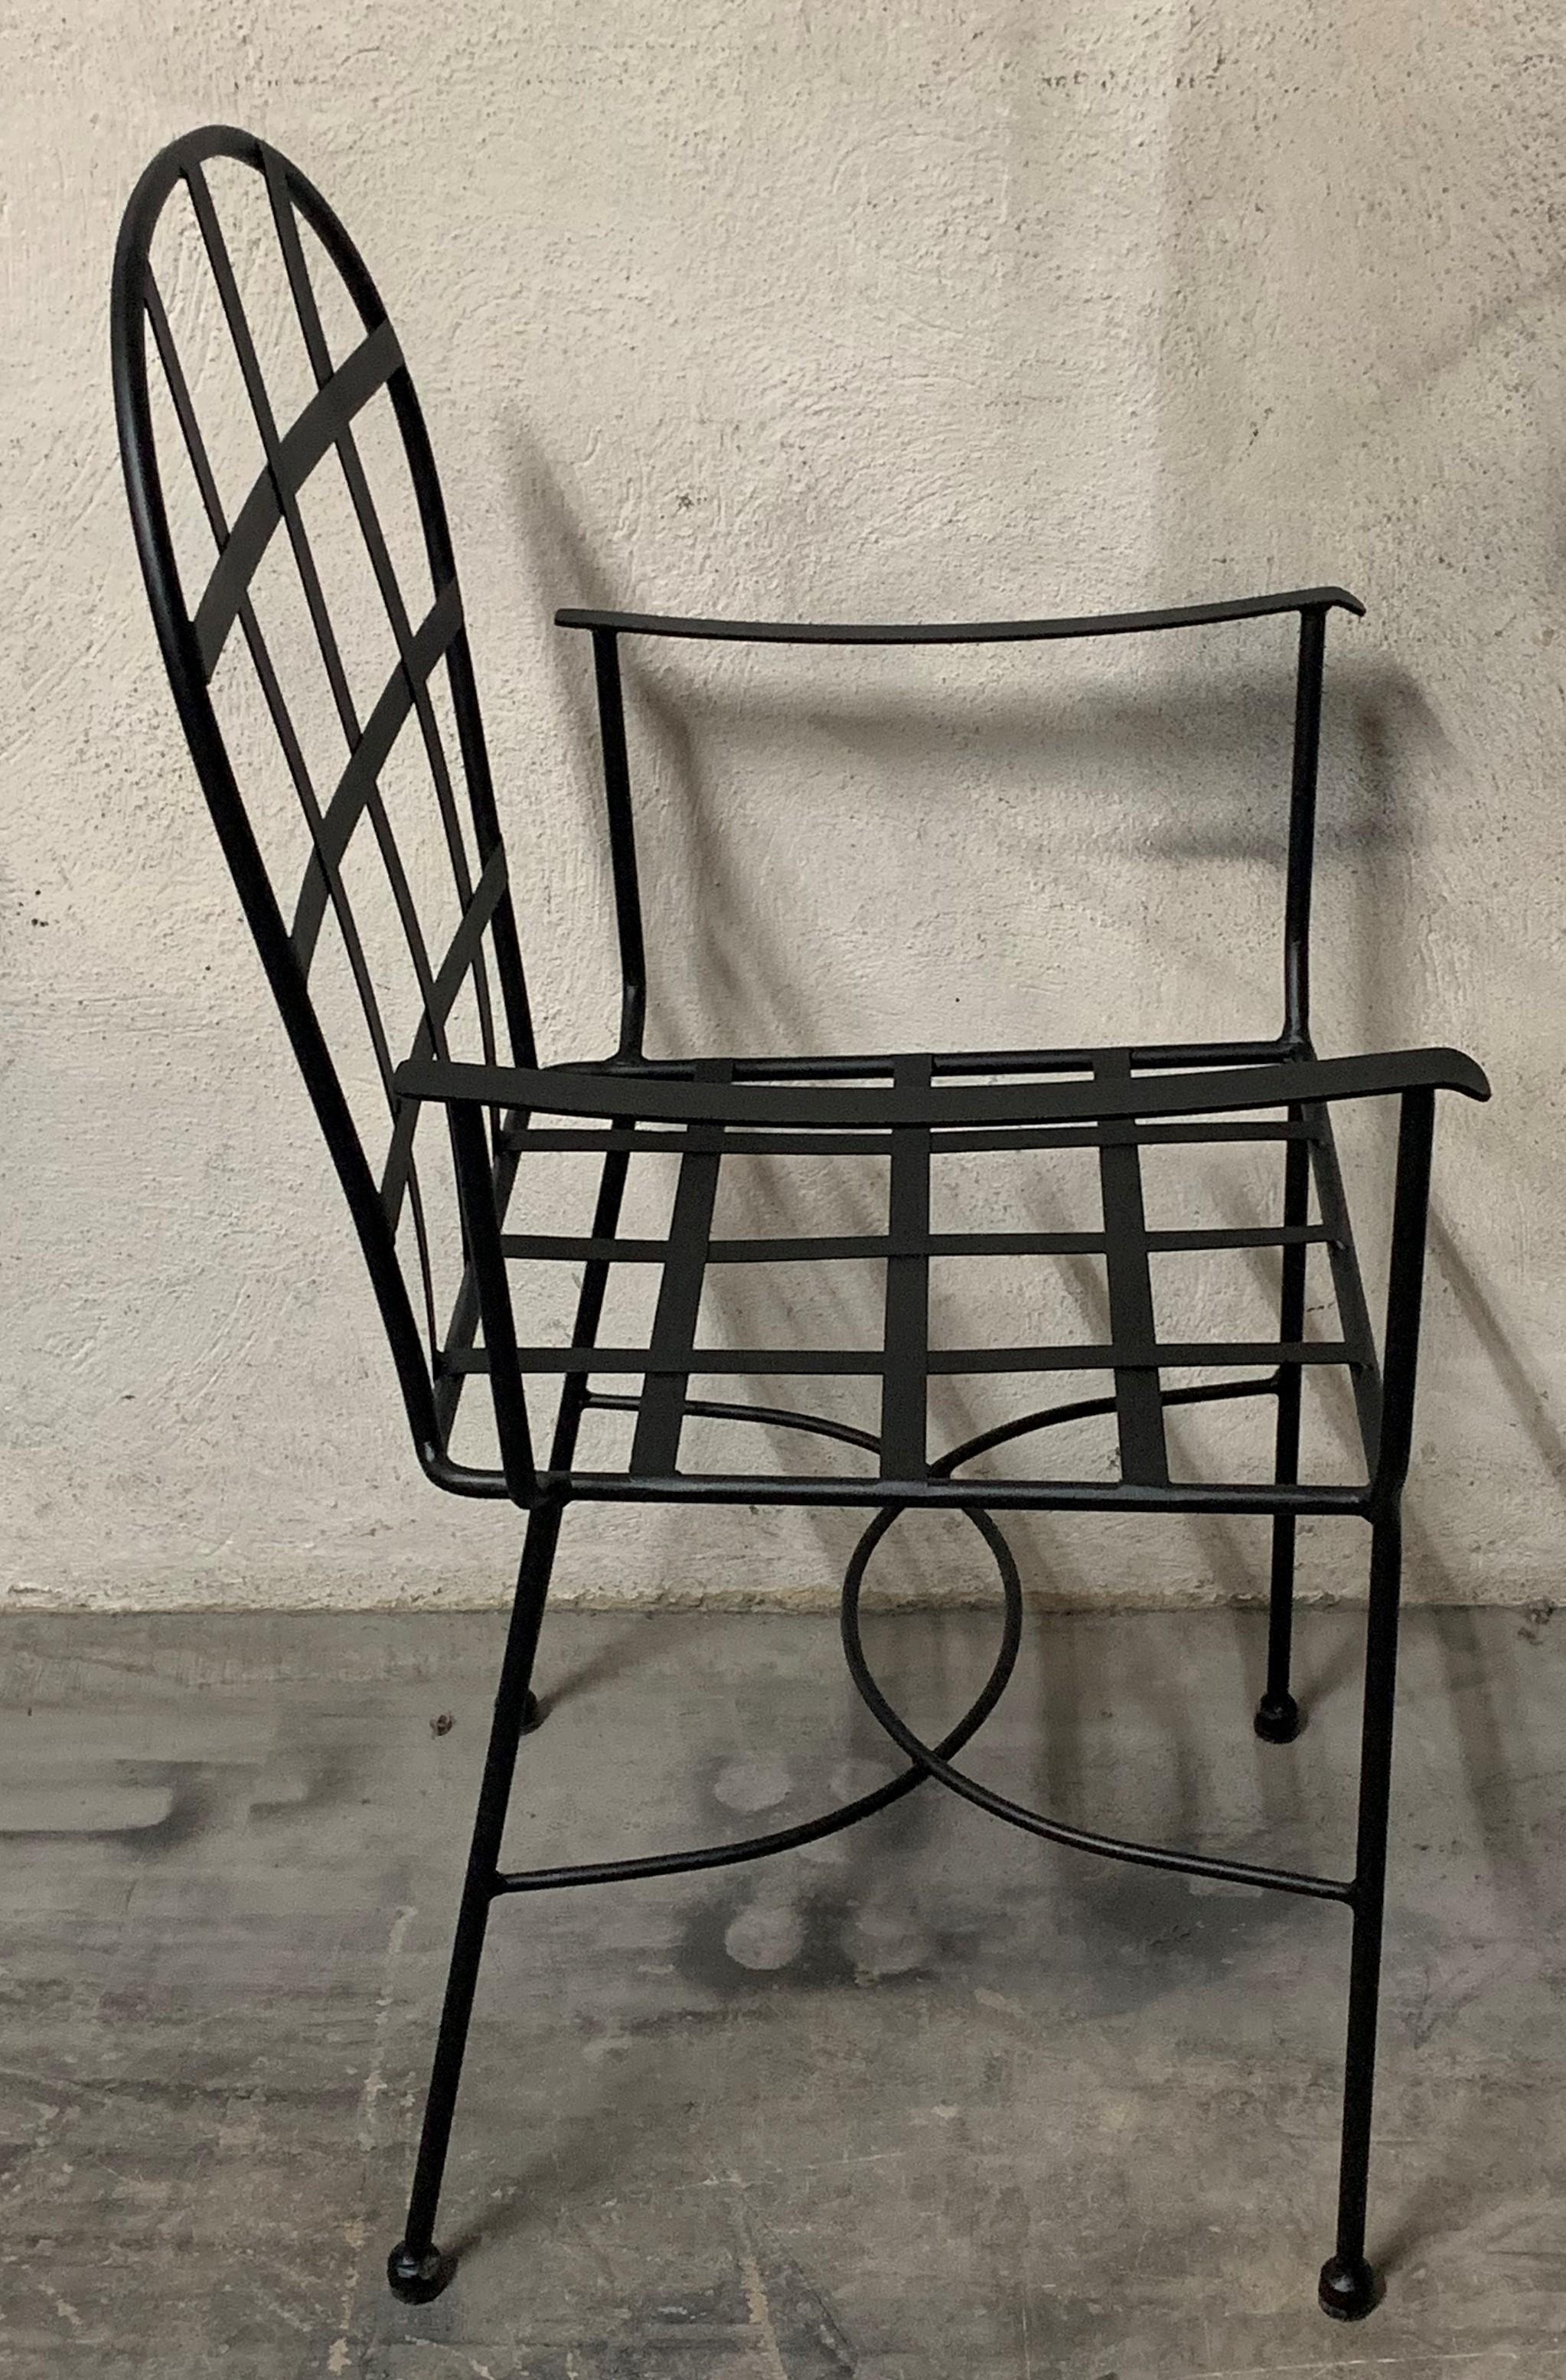 Contemporary Garden Or Dinning Armchairs in Black Wrought Iron. Indoor & Outdoor For Sale